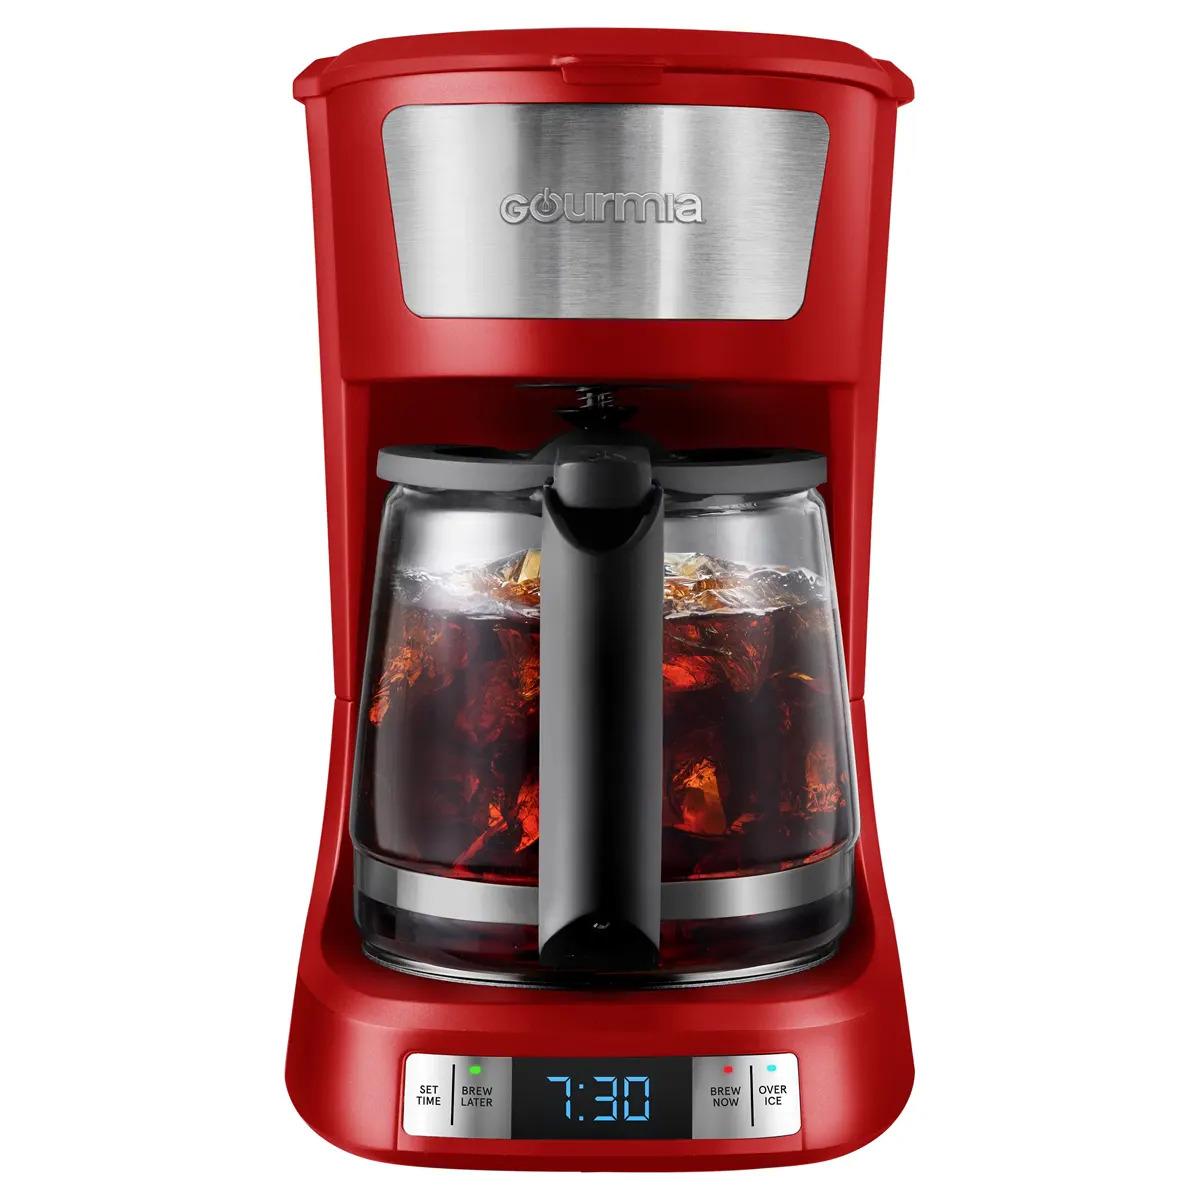 Gourmia Programmable Hot and Iced 12-Cup Coffee Maker for $15